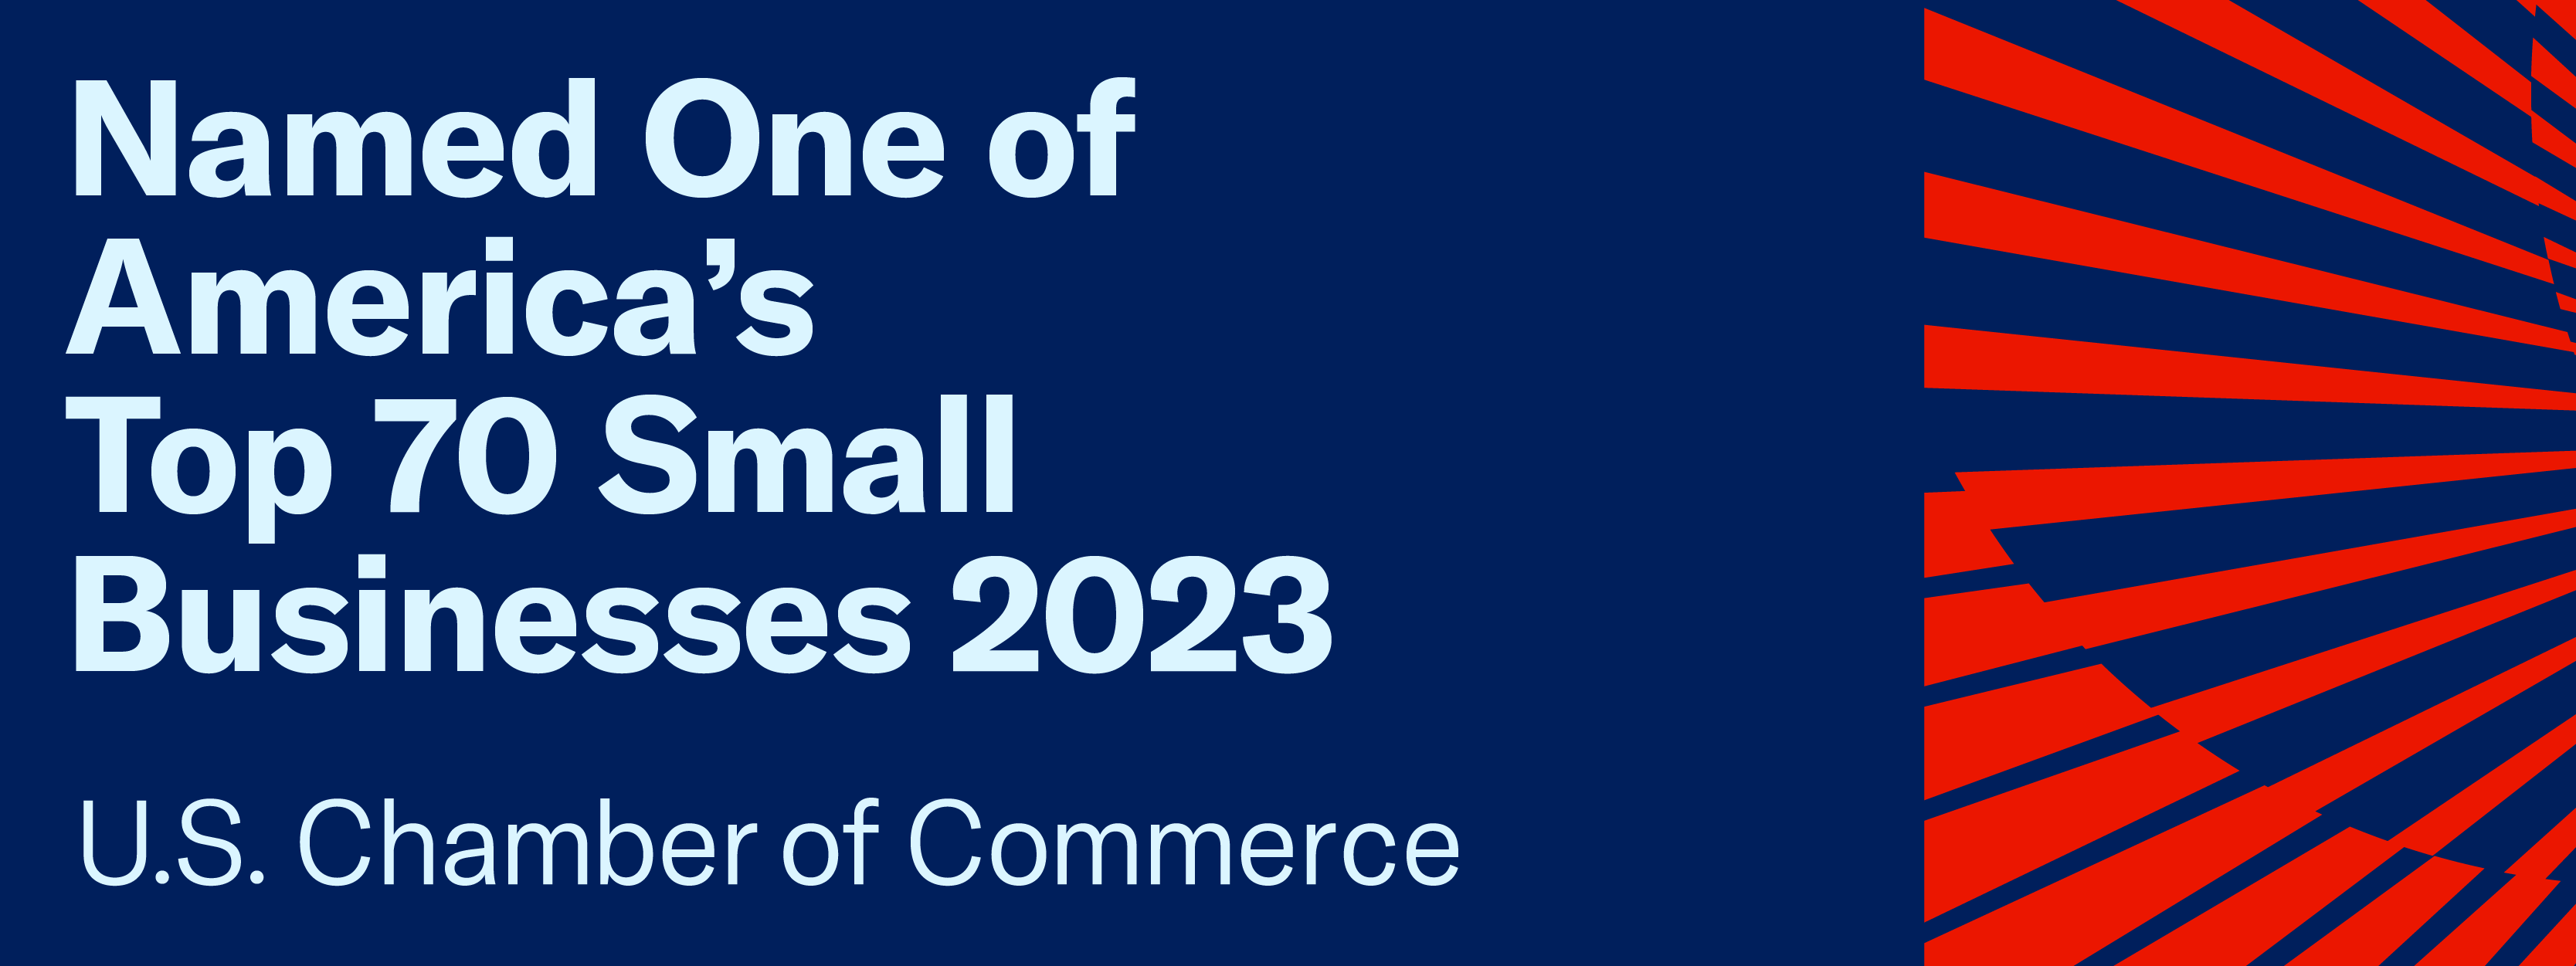 Named one of America's Top 70 Small Businesses 2023